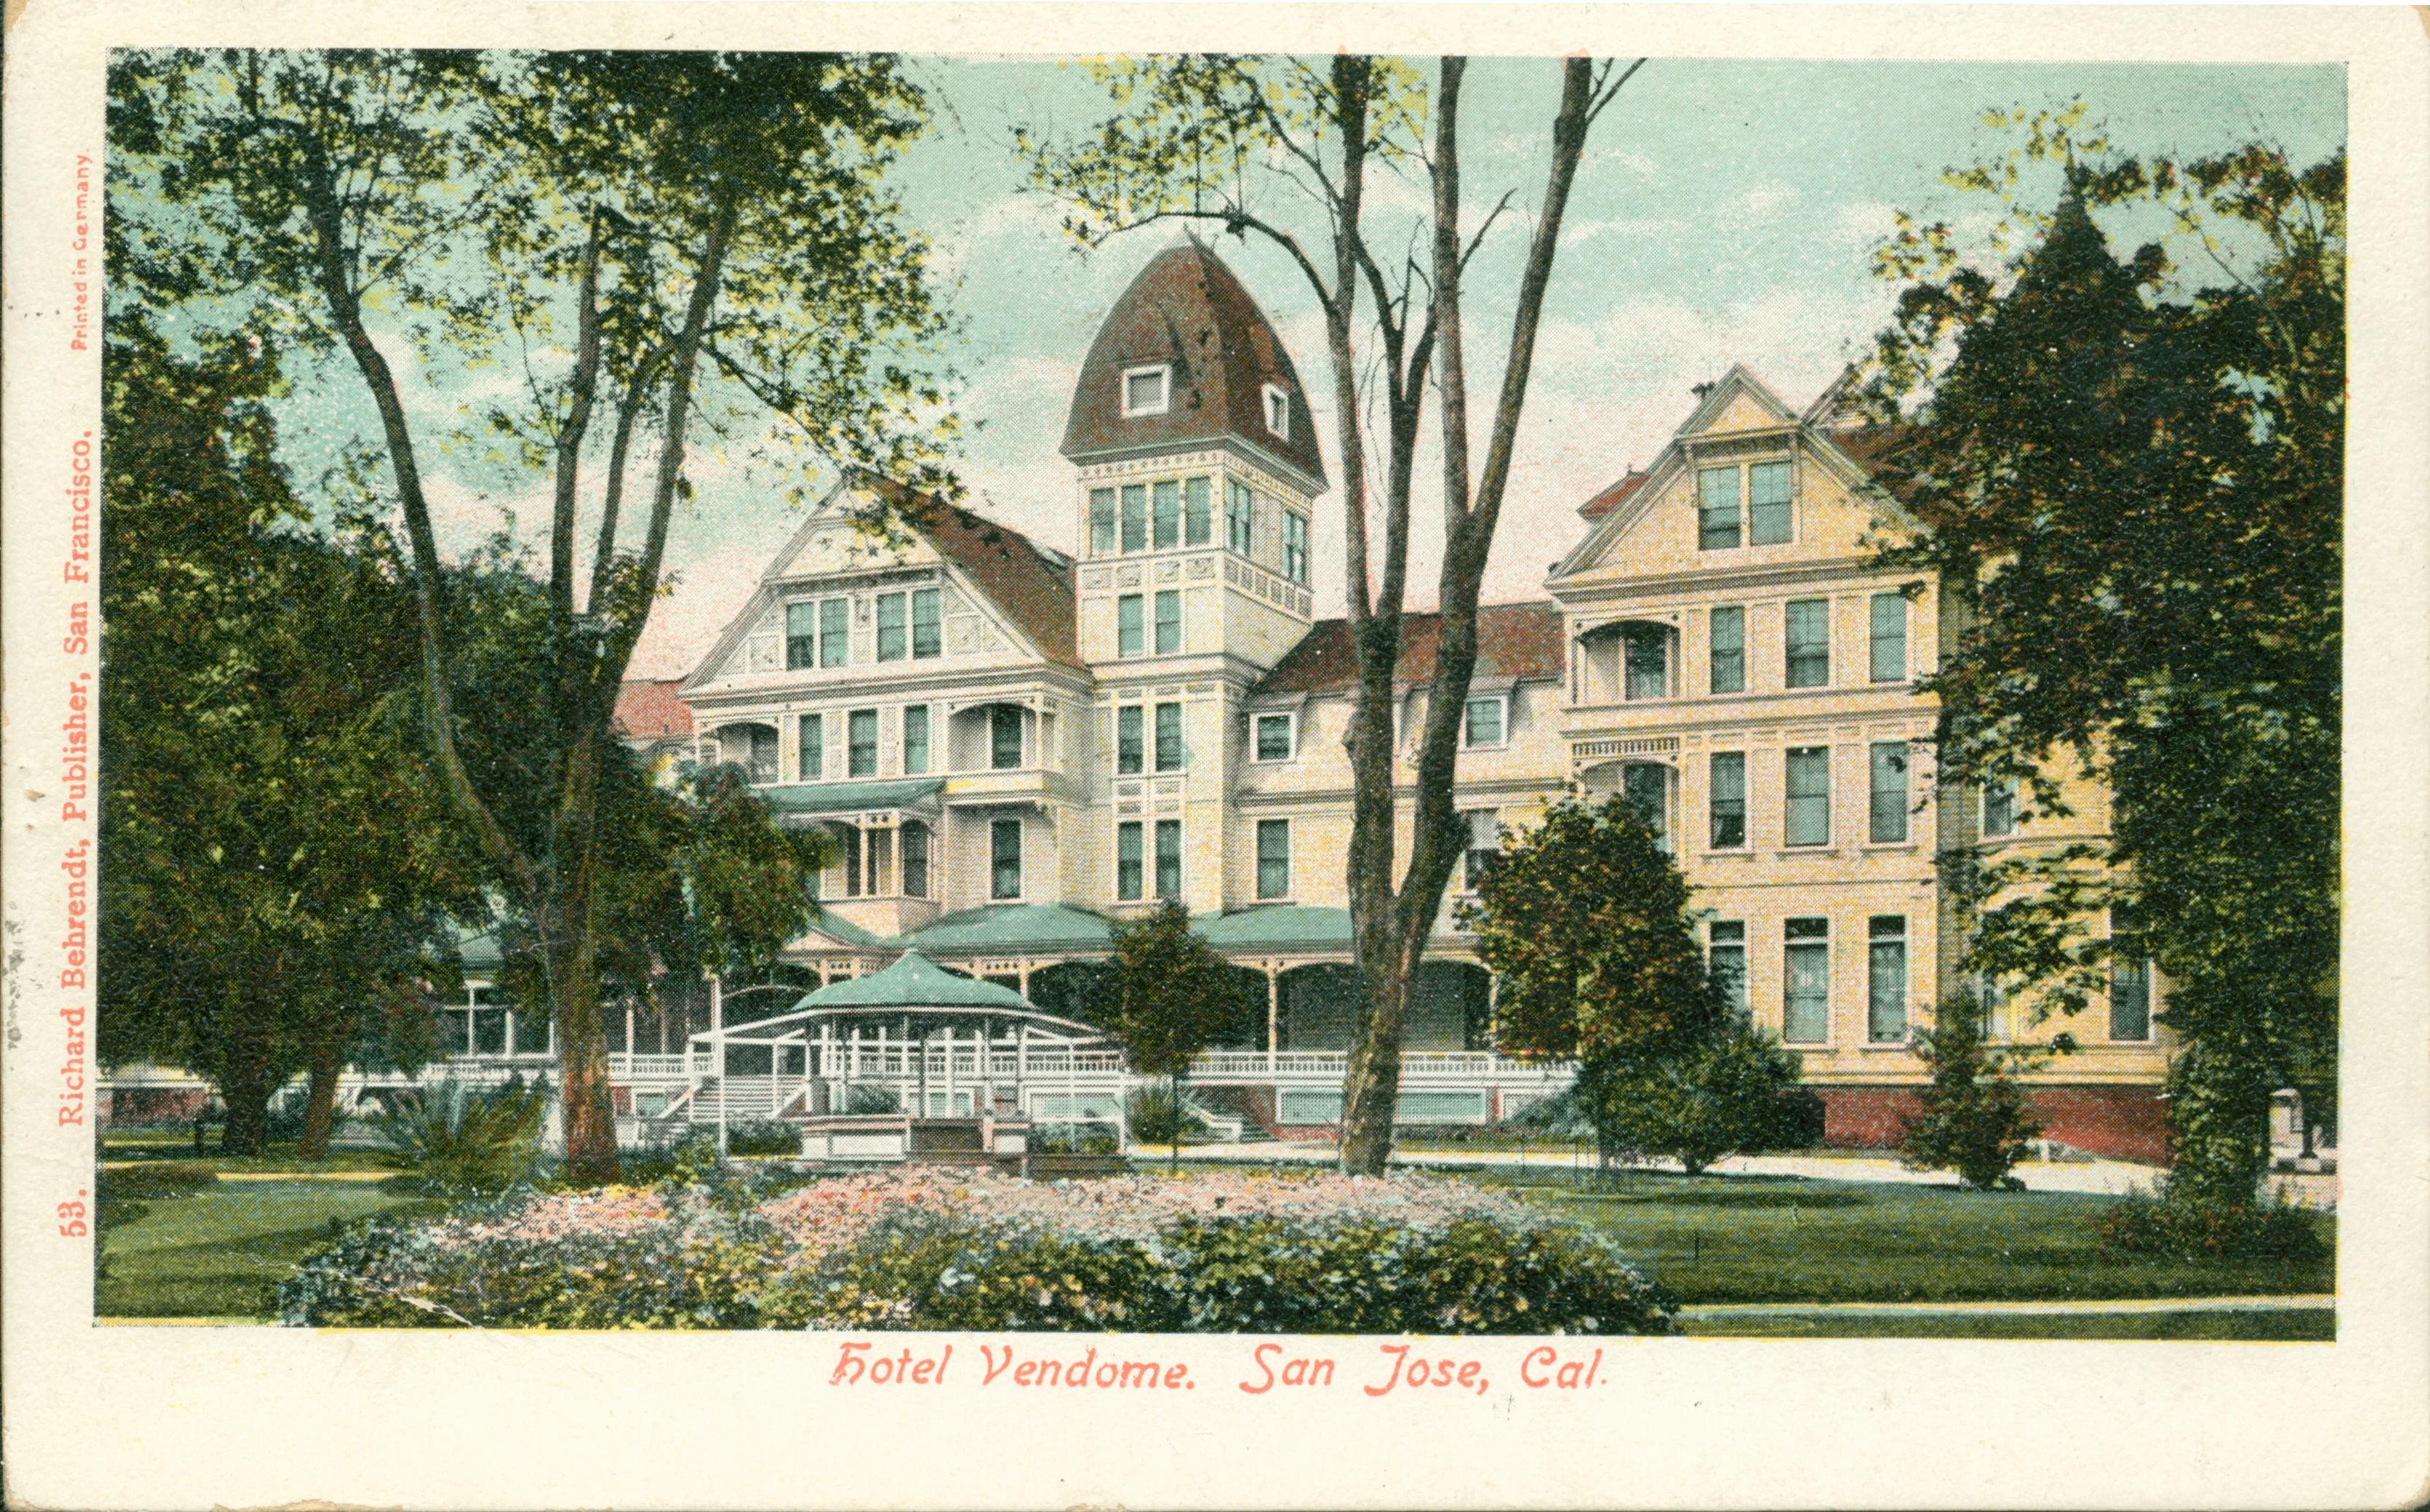 Colorful scene of the Hotel Vendome, road in front of hotel with gardens and trees